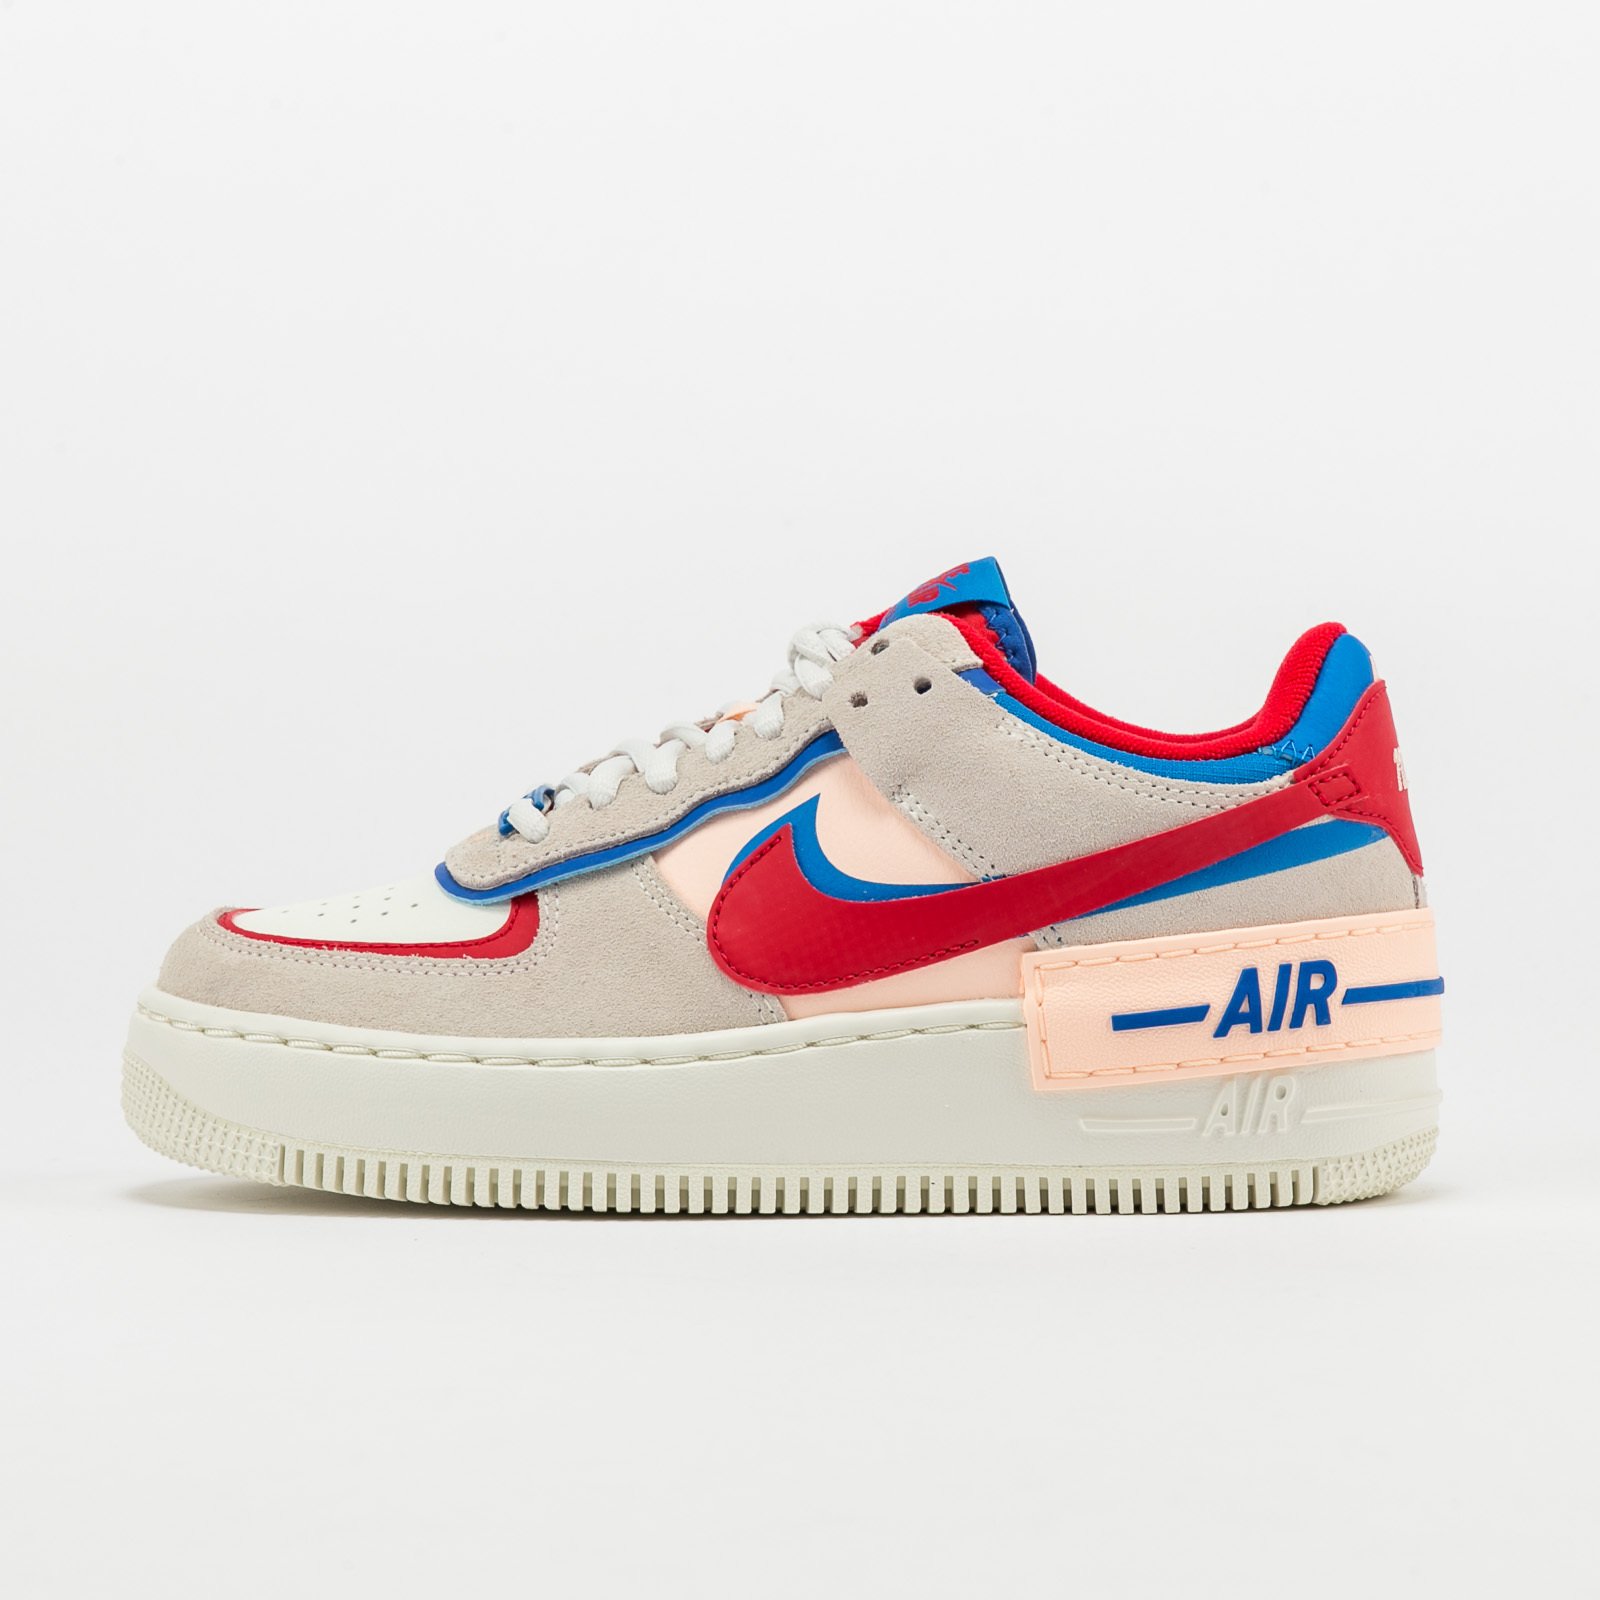 Nike Air Force 1 Shadow sneakers in white and red